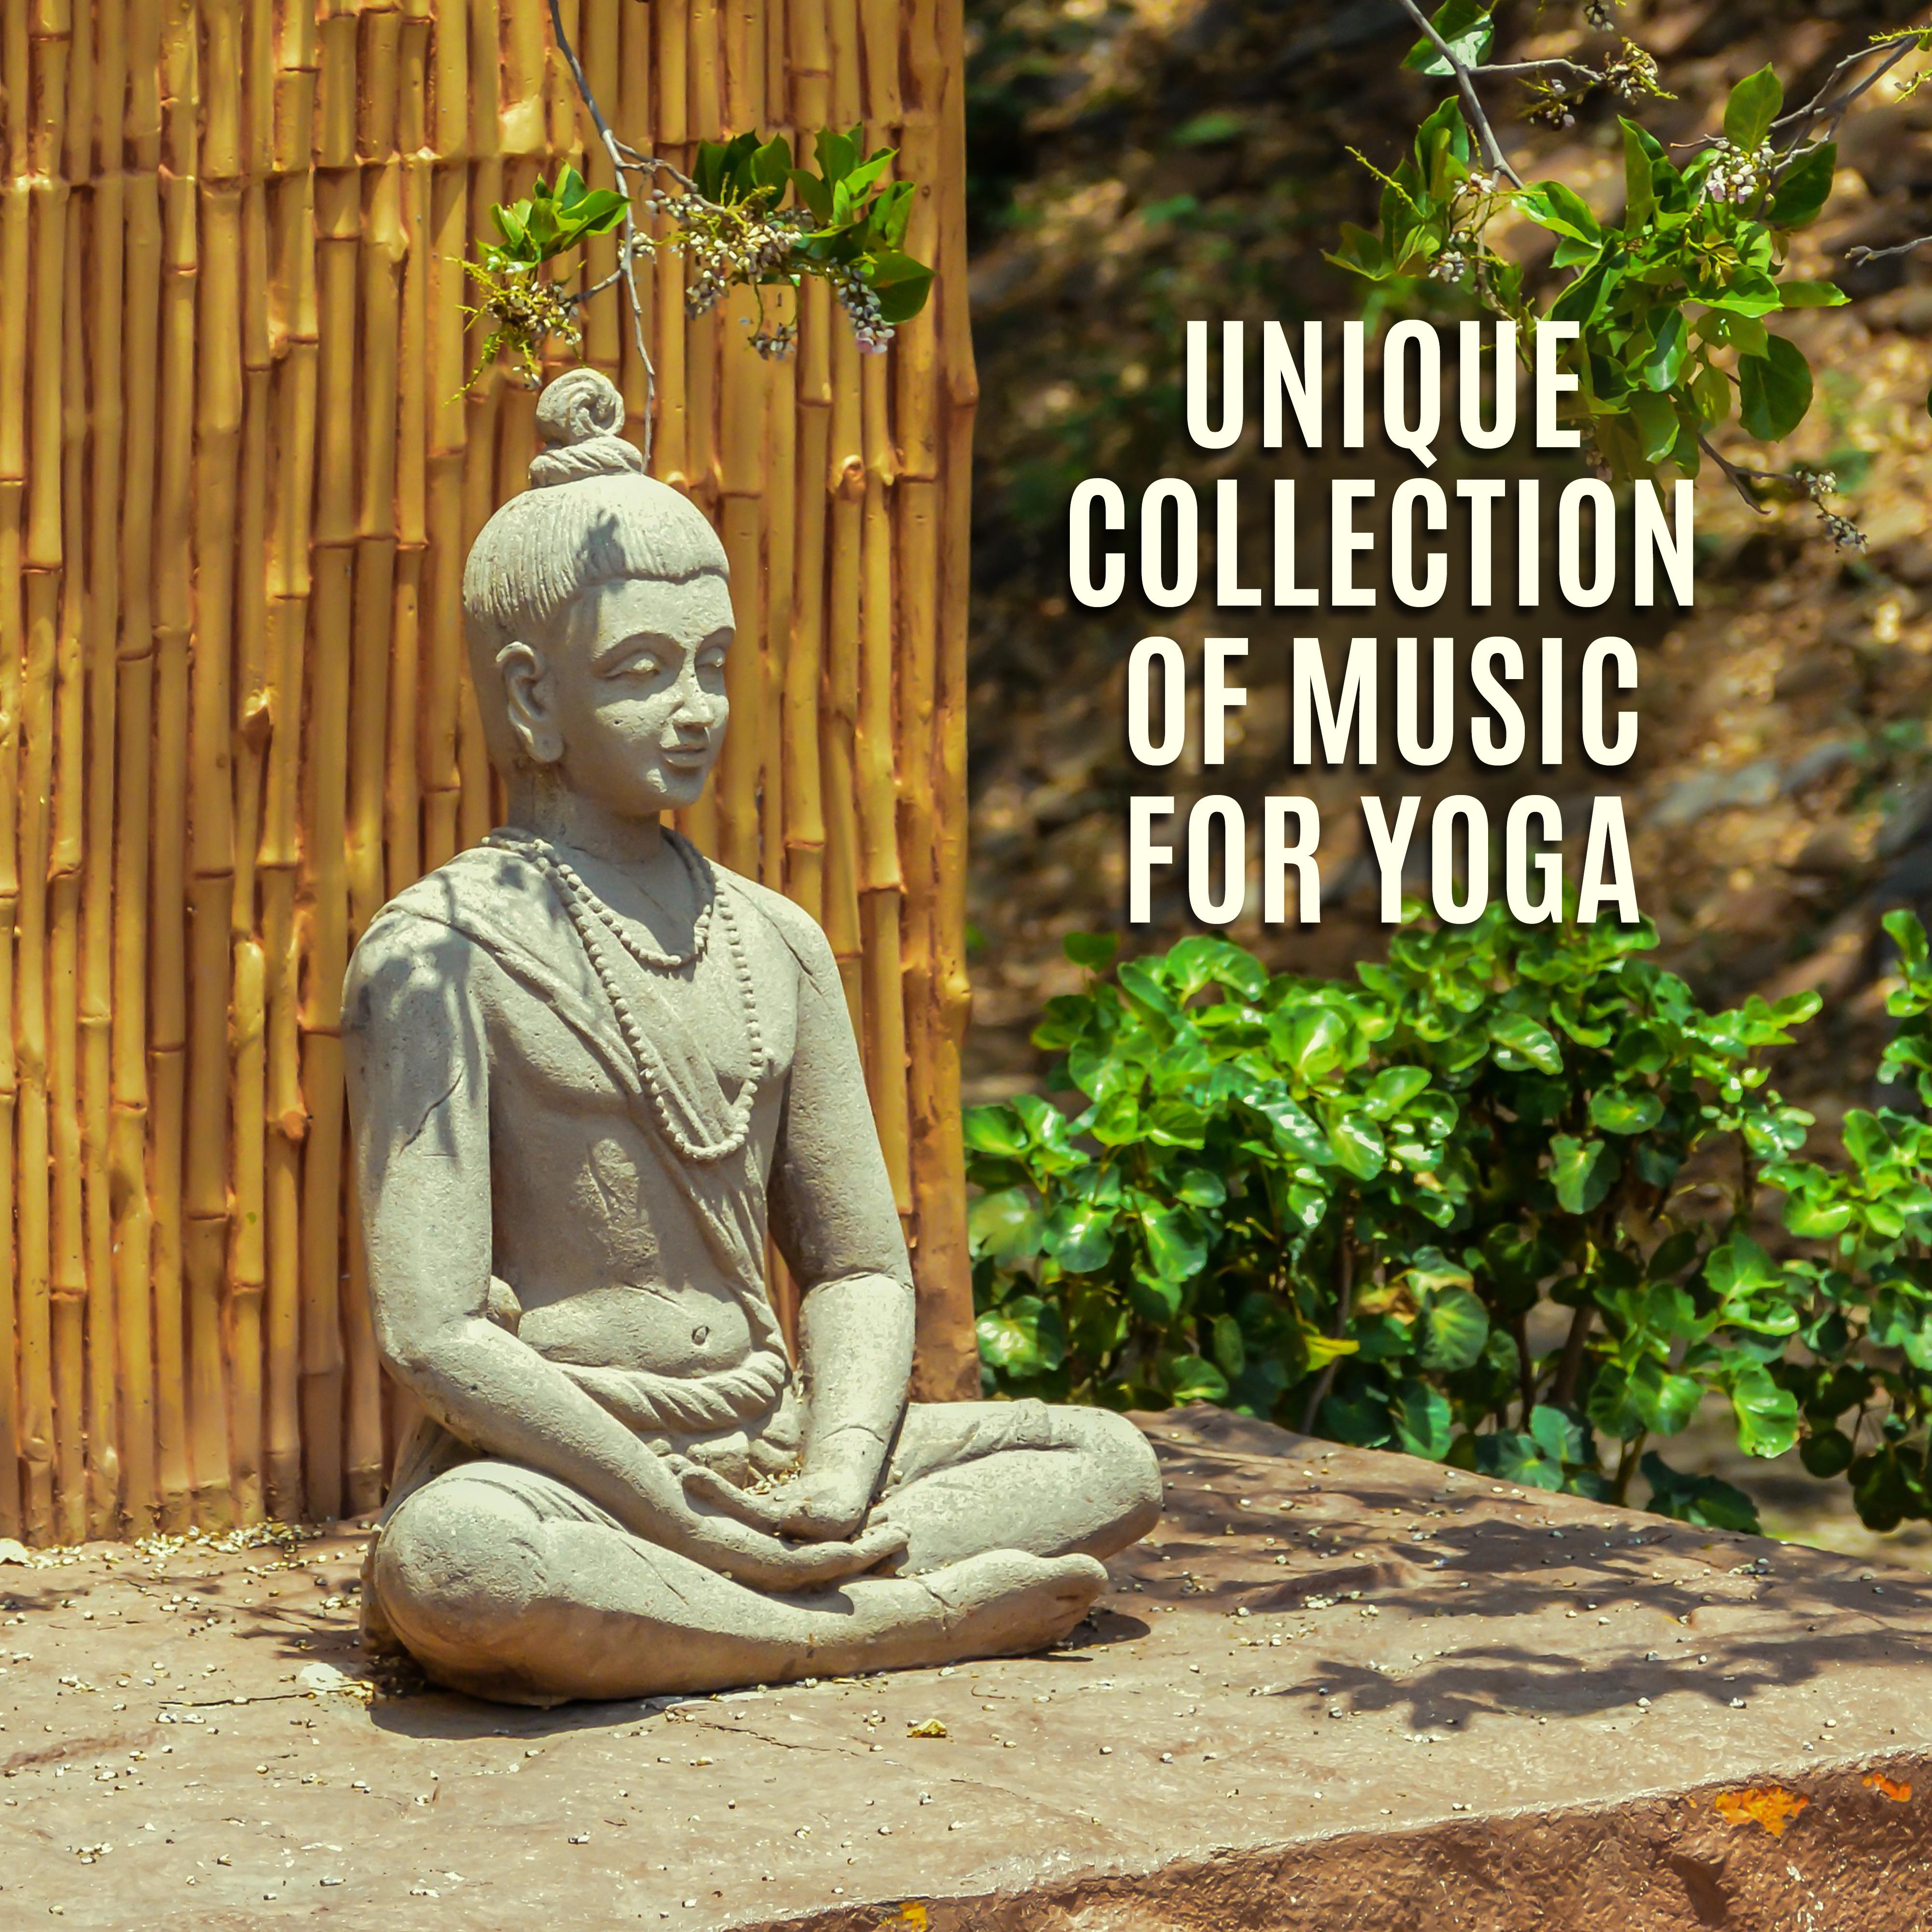 Unique Collection of Music for Yoga